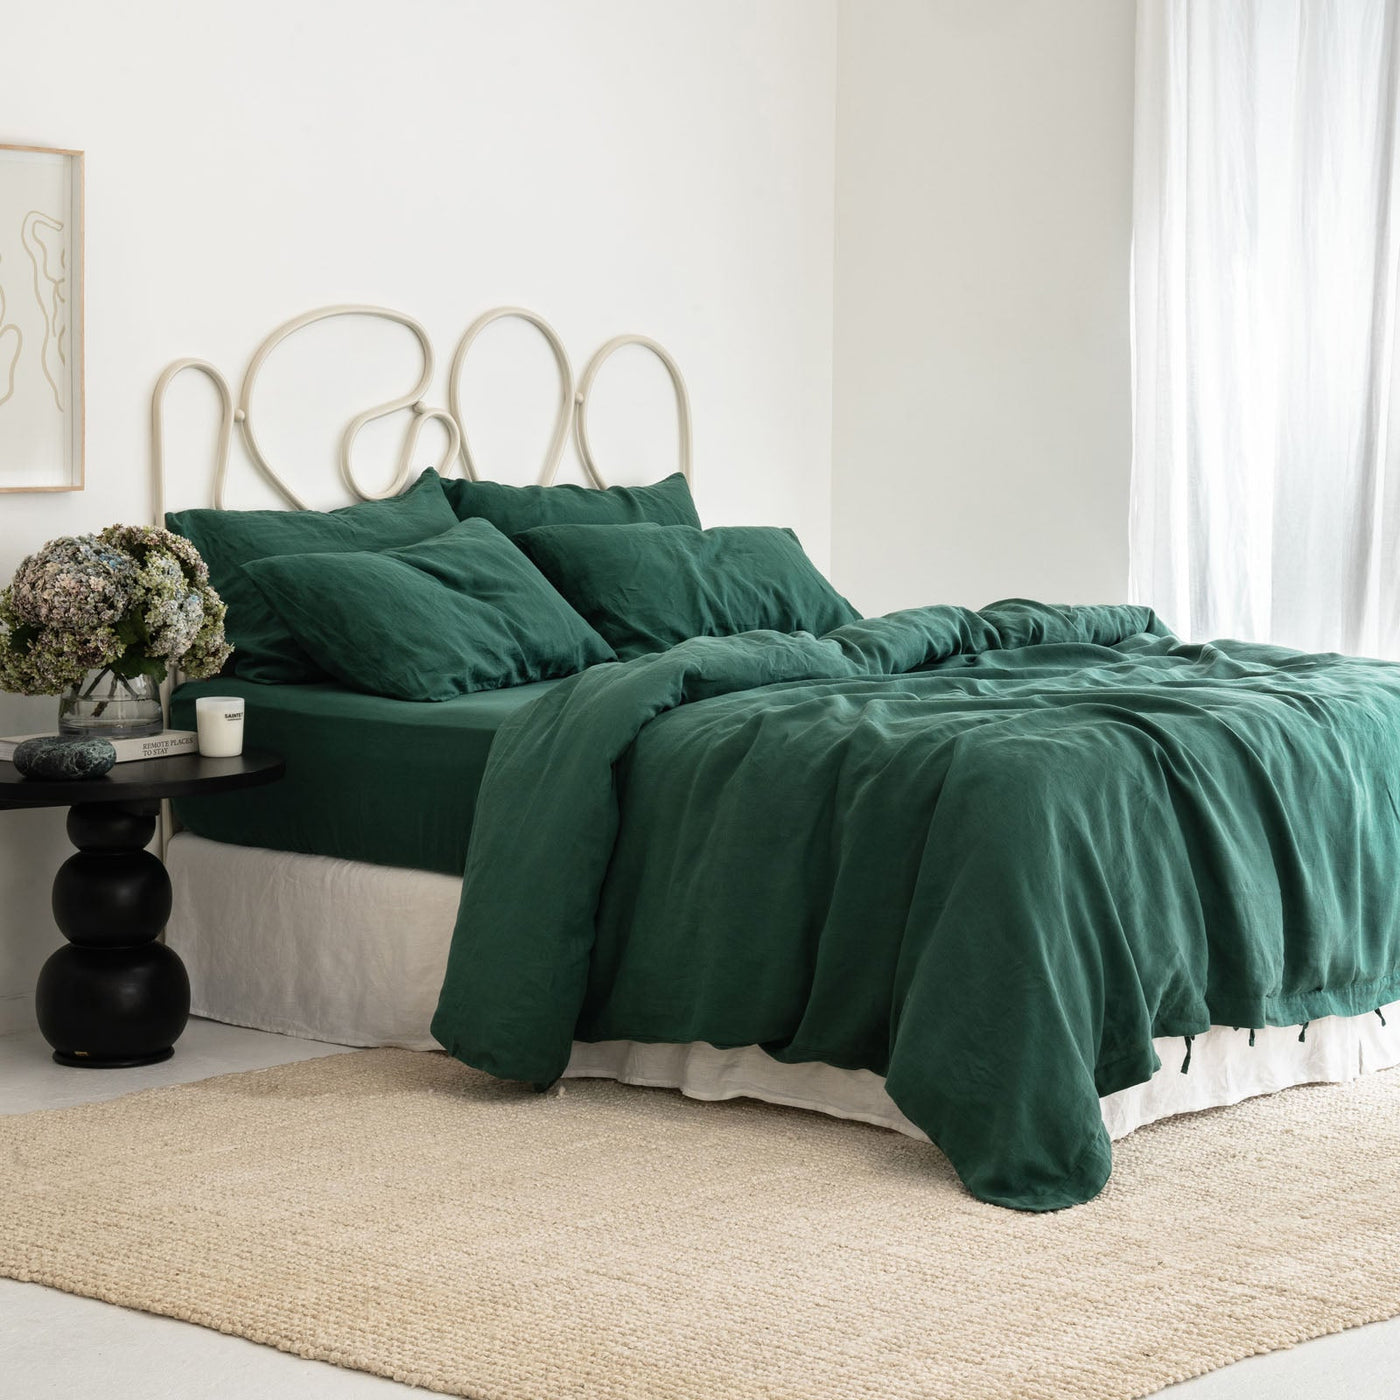 French Flax Linen Quilt Cover in Jade